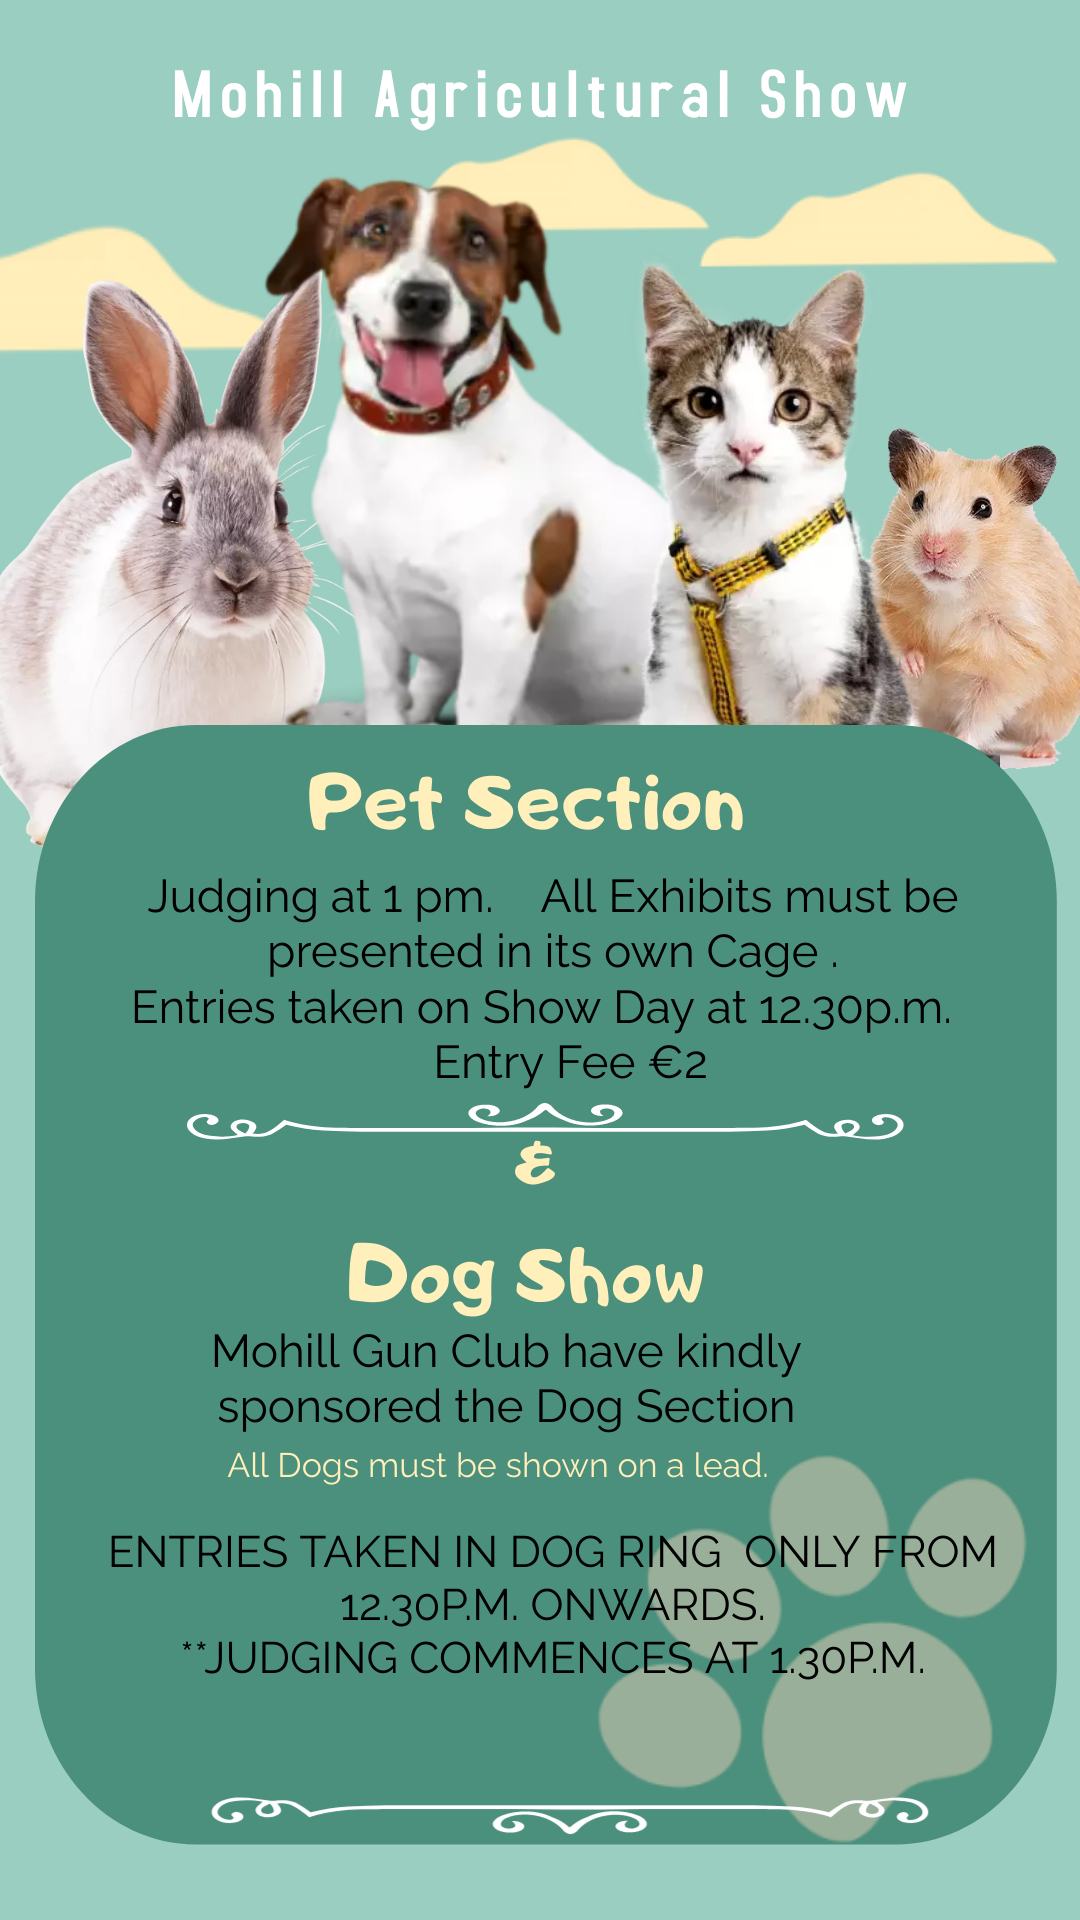 Pet Section & Dog Show